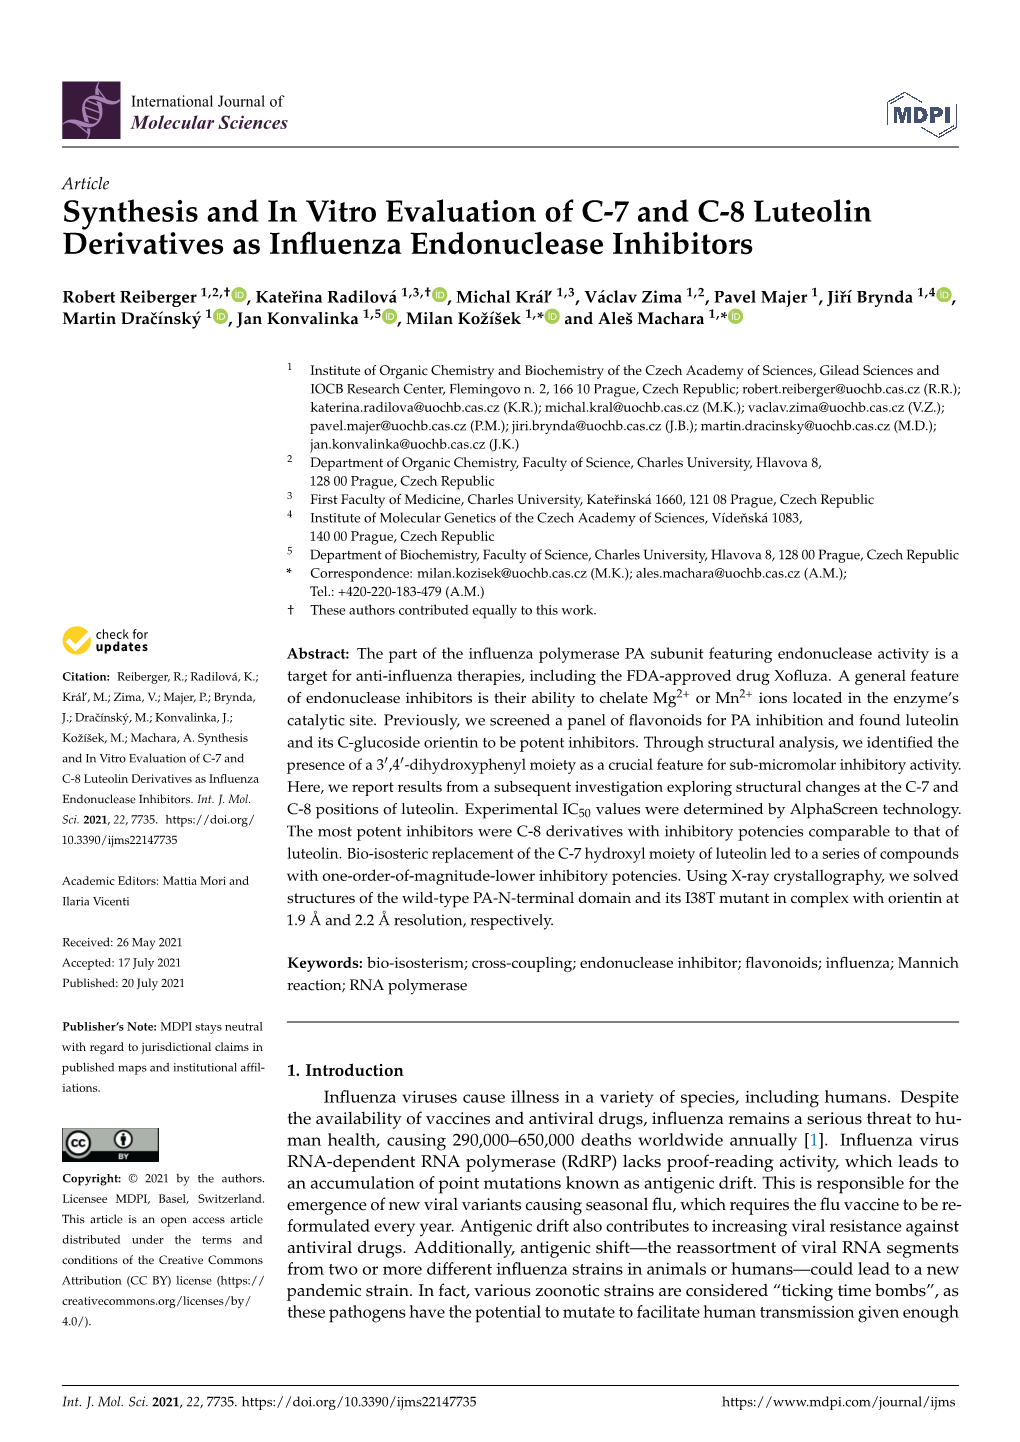 Synthesis and in Vitro Evaluation of C-7 and C-8 Luteolin Derivatives As Inﬂuenza Endonuclease Inhibitors